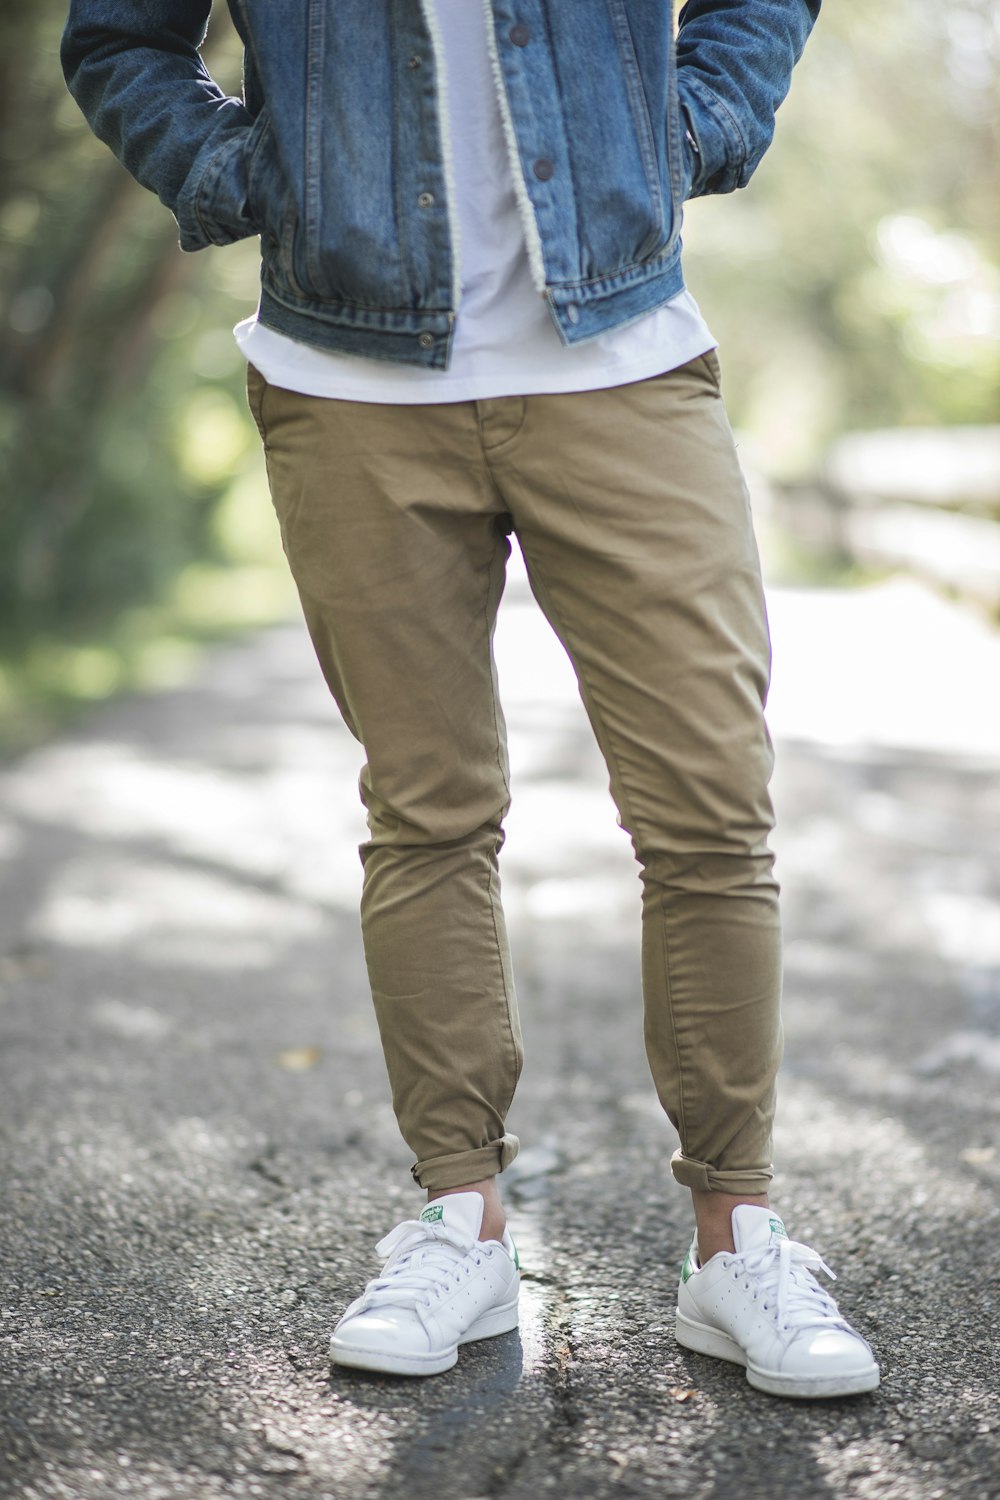 man wearing brown fitted jeans and sneakers standing on road at daytime  photo – Free Fashion Image on Unsplash